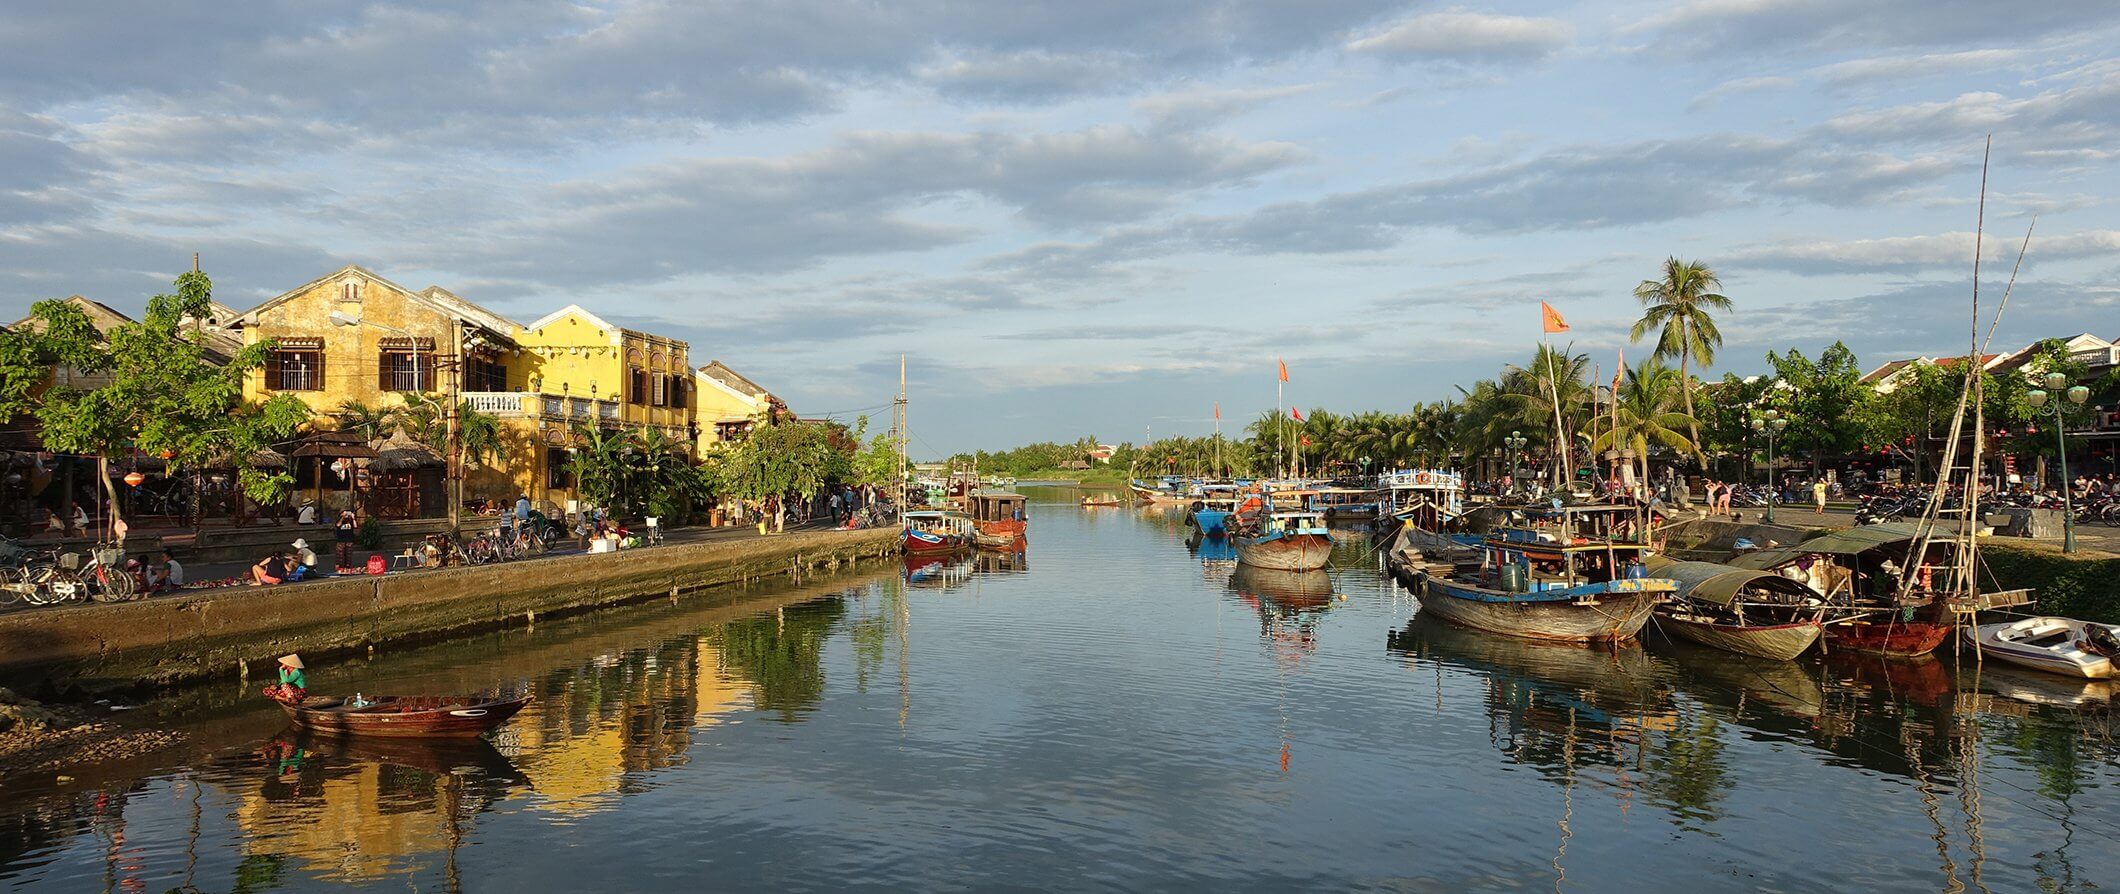 Backpacking Hoi An Travel Guide for 2022: SEE, DO, STAY, & SAVE!